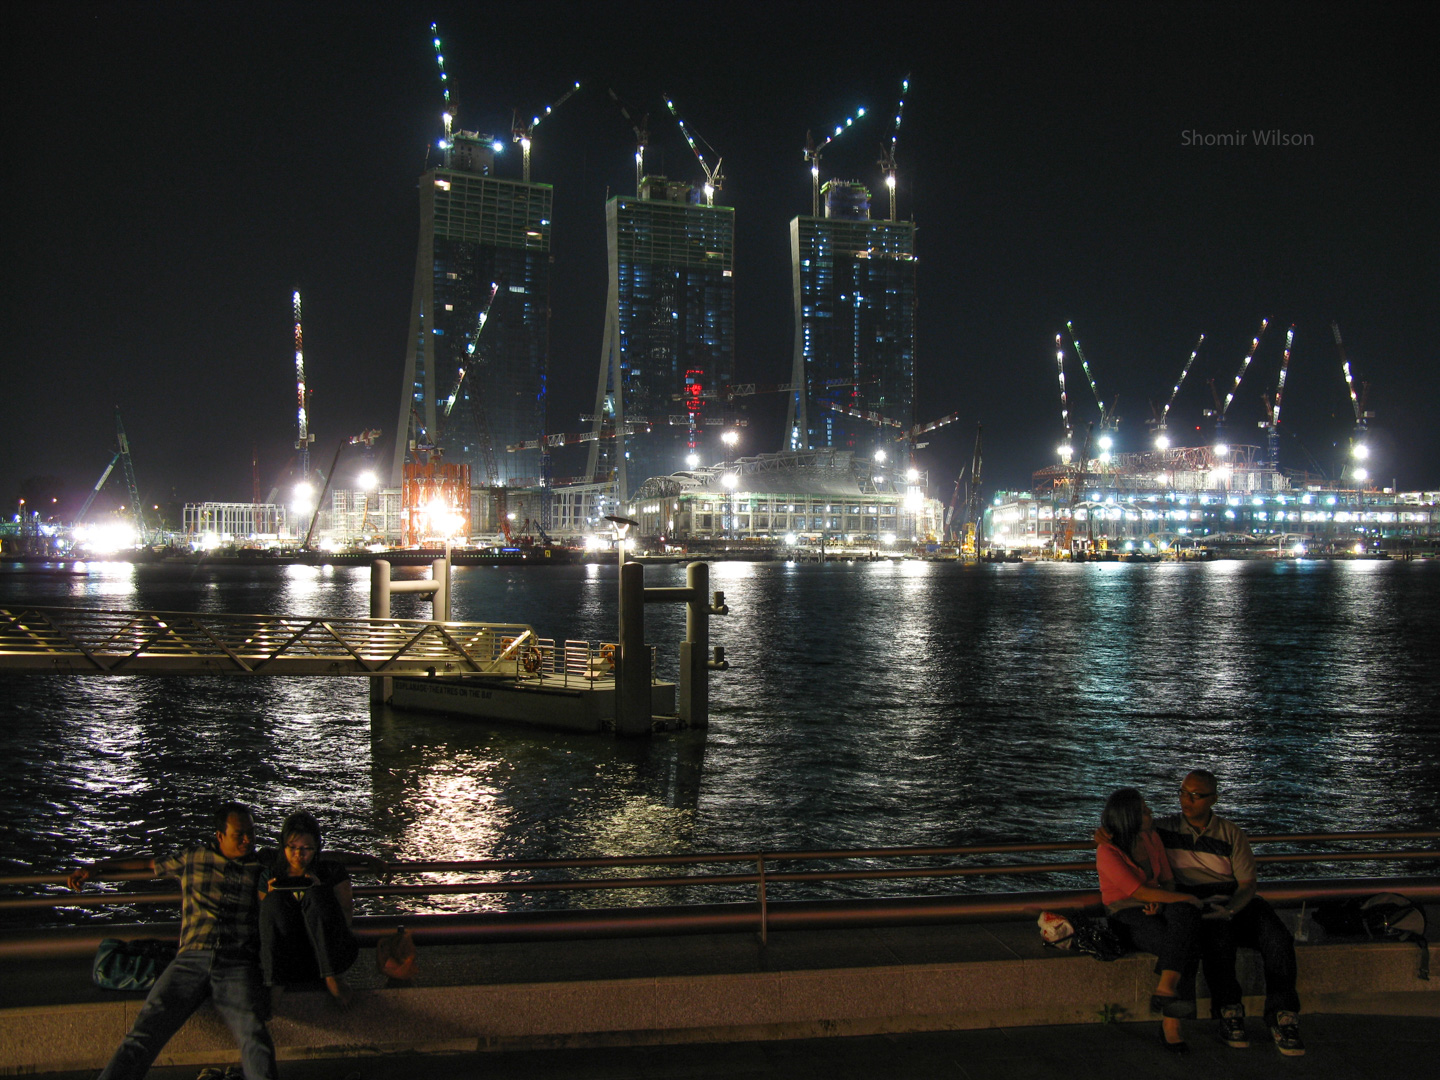 Brightly lit construction site across the water from the foreground, in which two couples canoodle